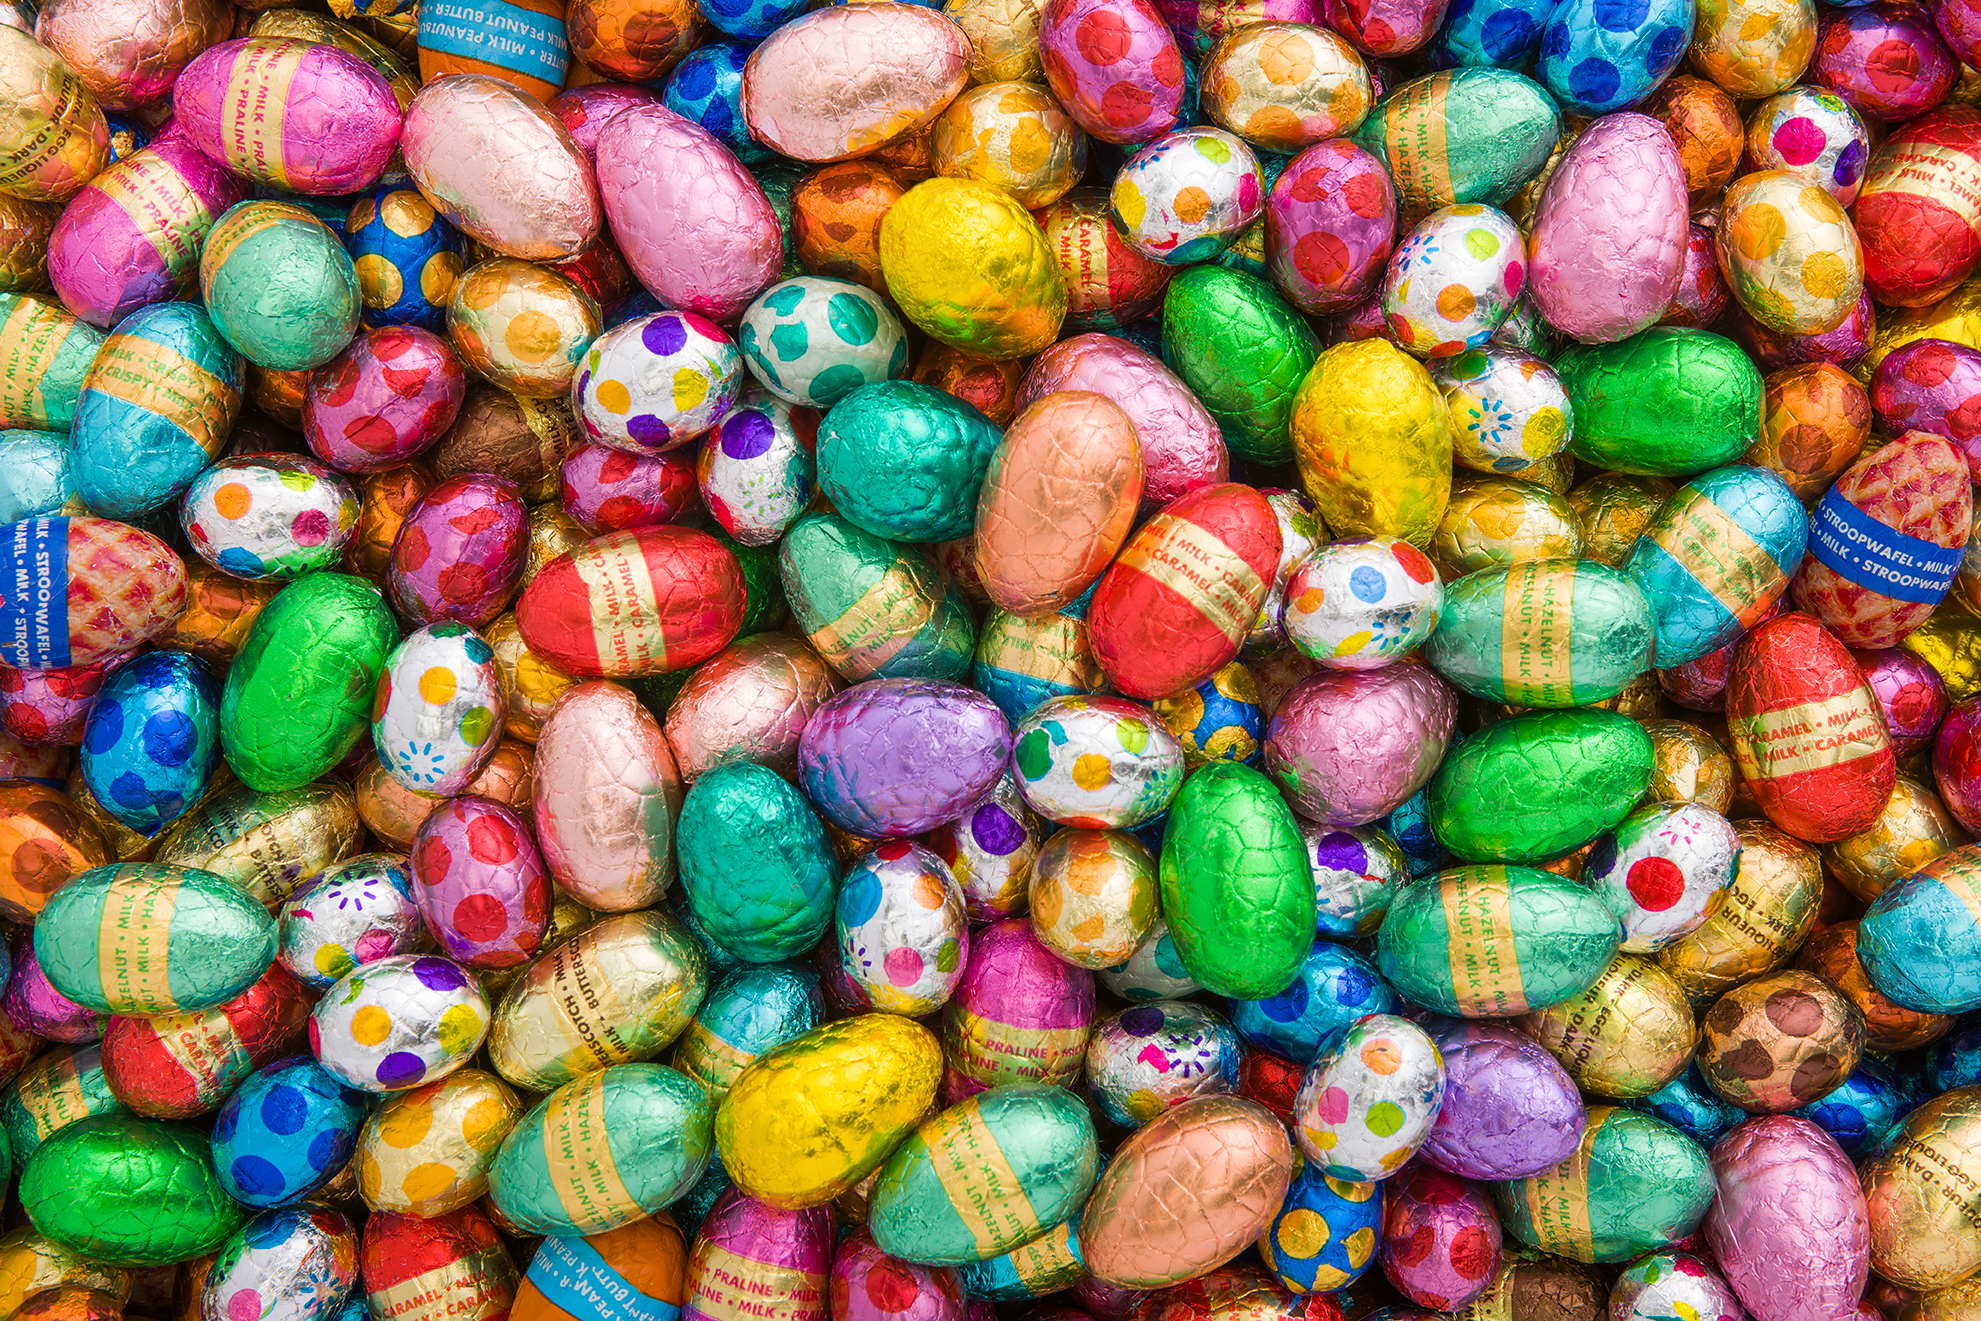 A photo full of chocolate Easter eggs.